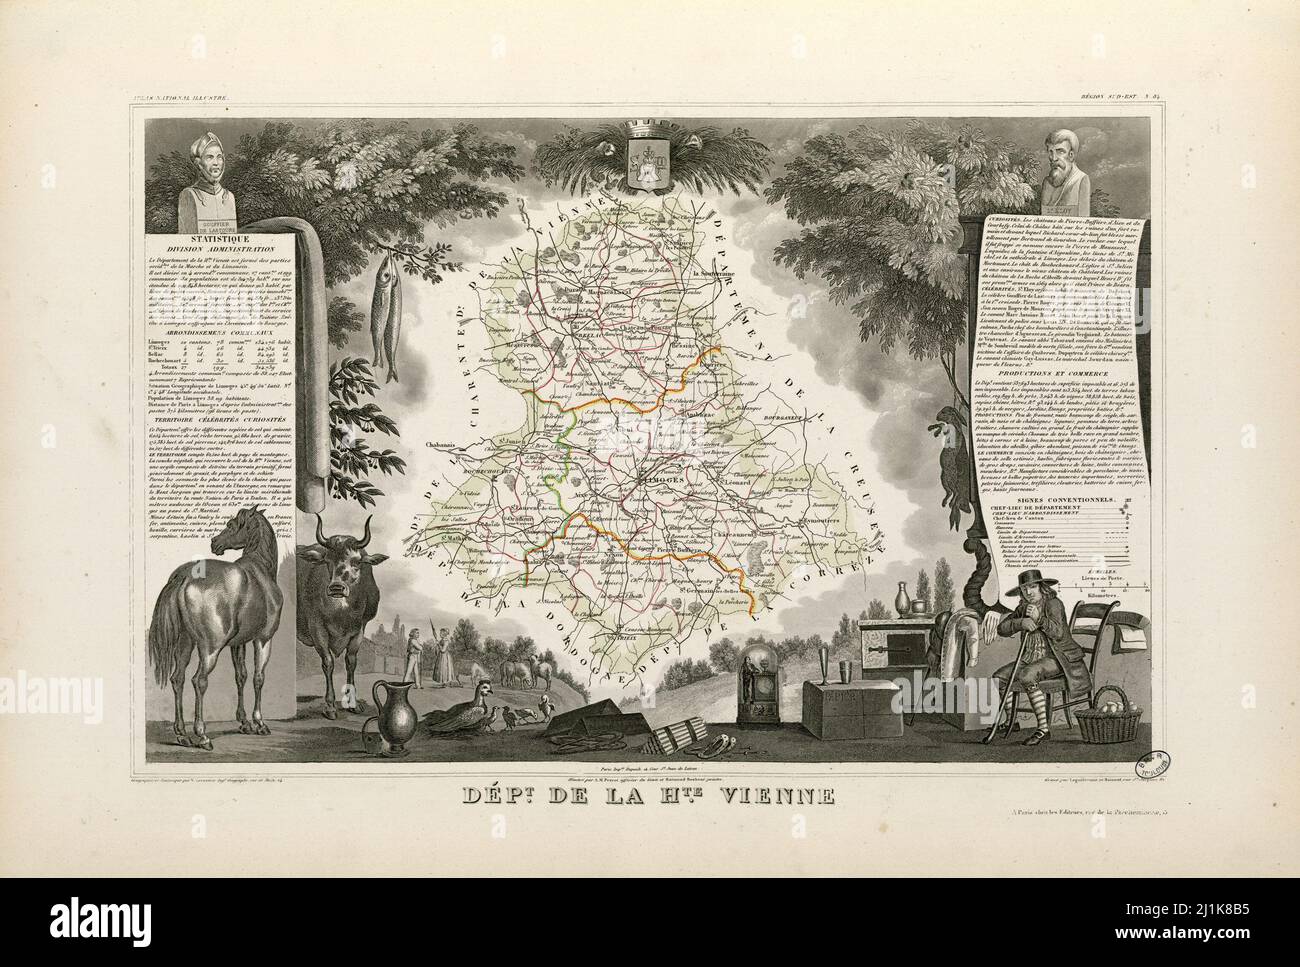 Vintage map French colonies and areas from 19th century. All maps are beautifully hand illustrated showing France at the time. Stock Photo